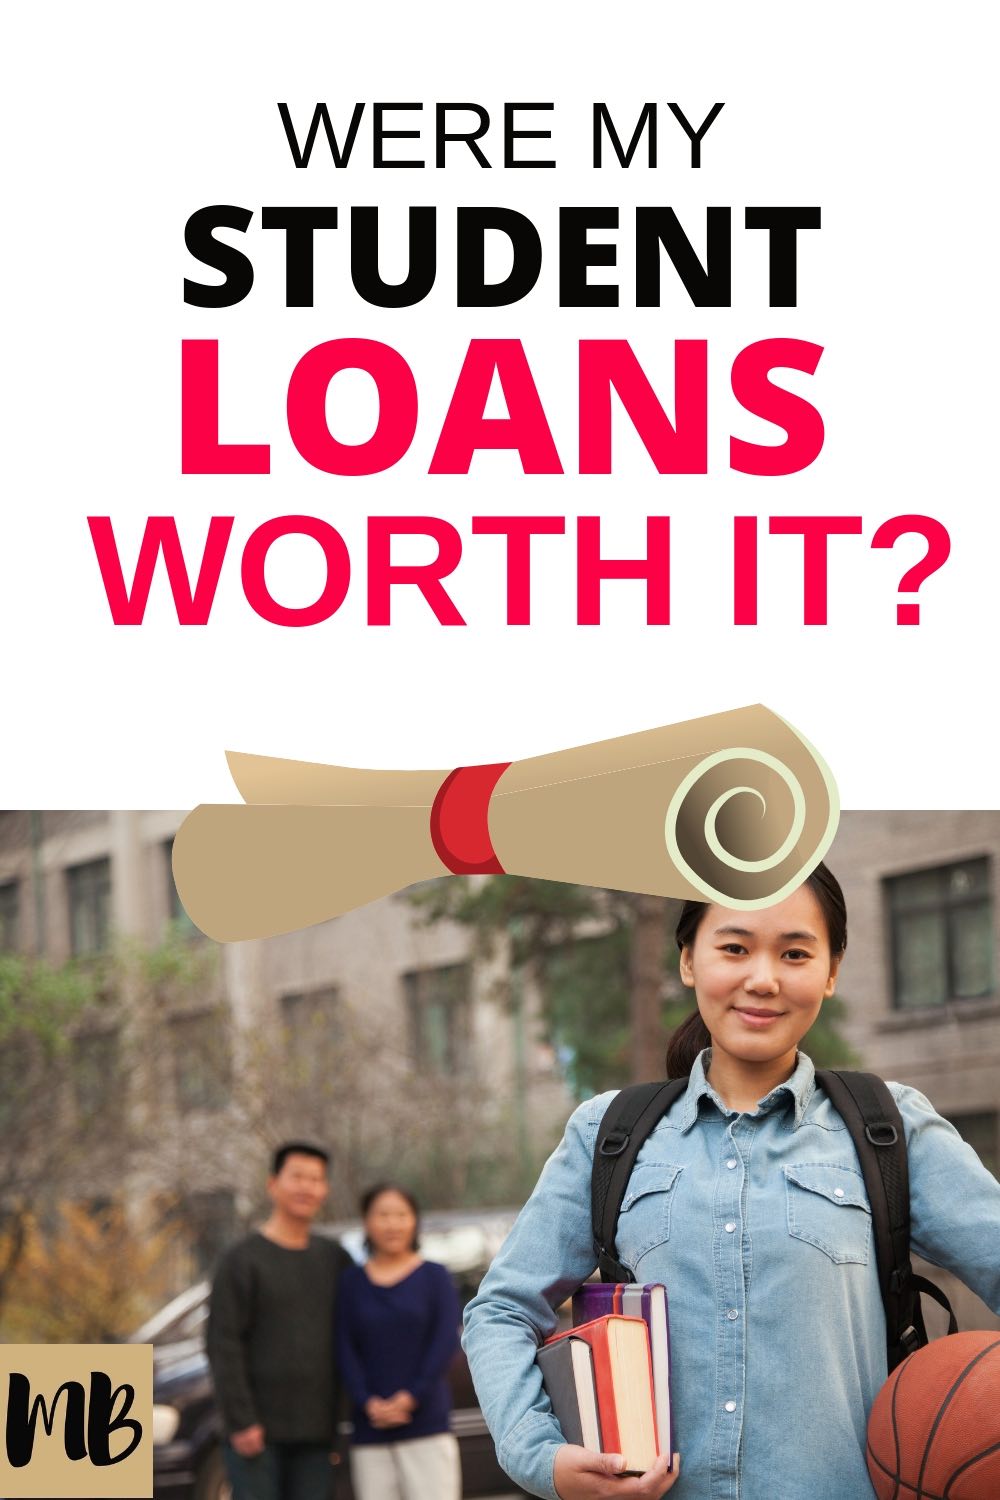 Were my Student loans worth it? Here's my opinion 5 years out of college.